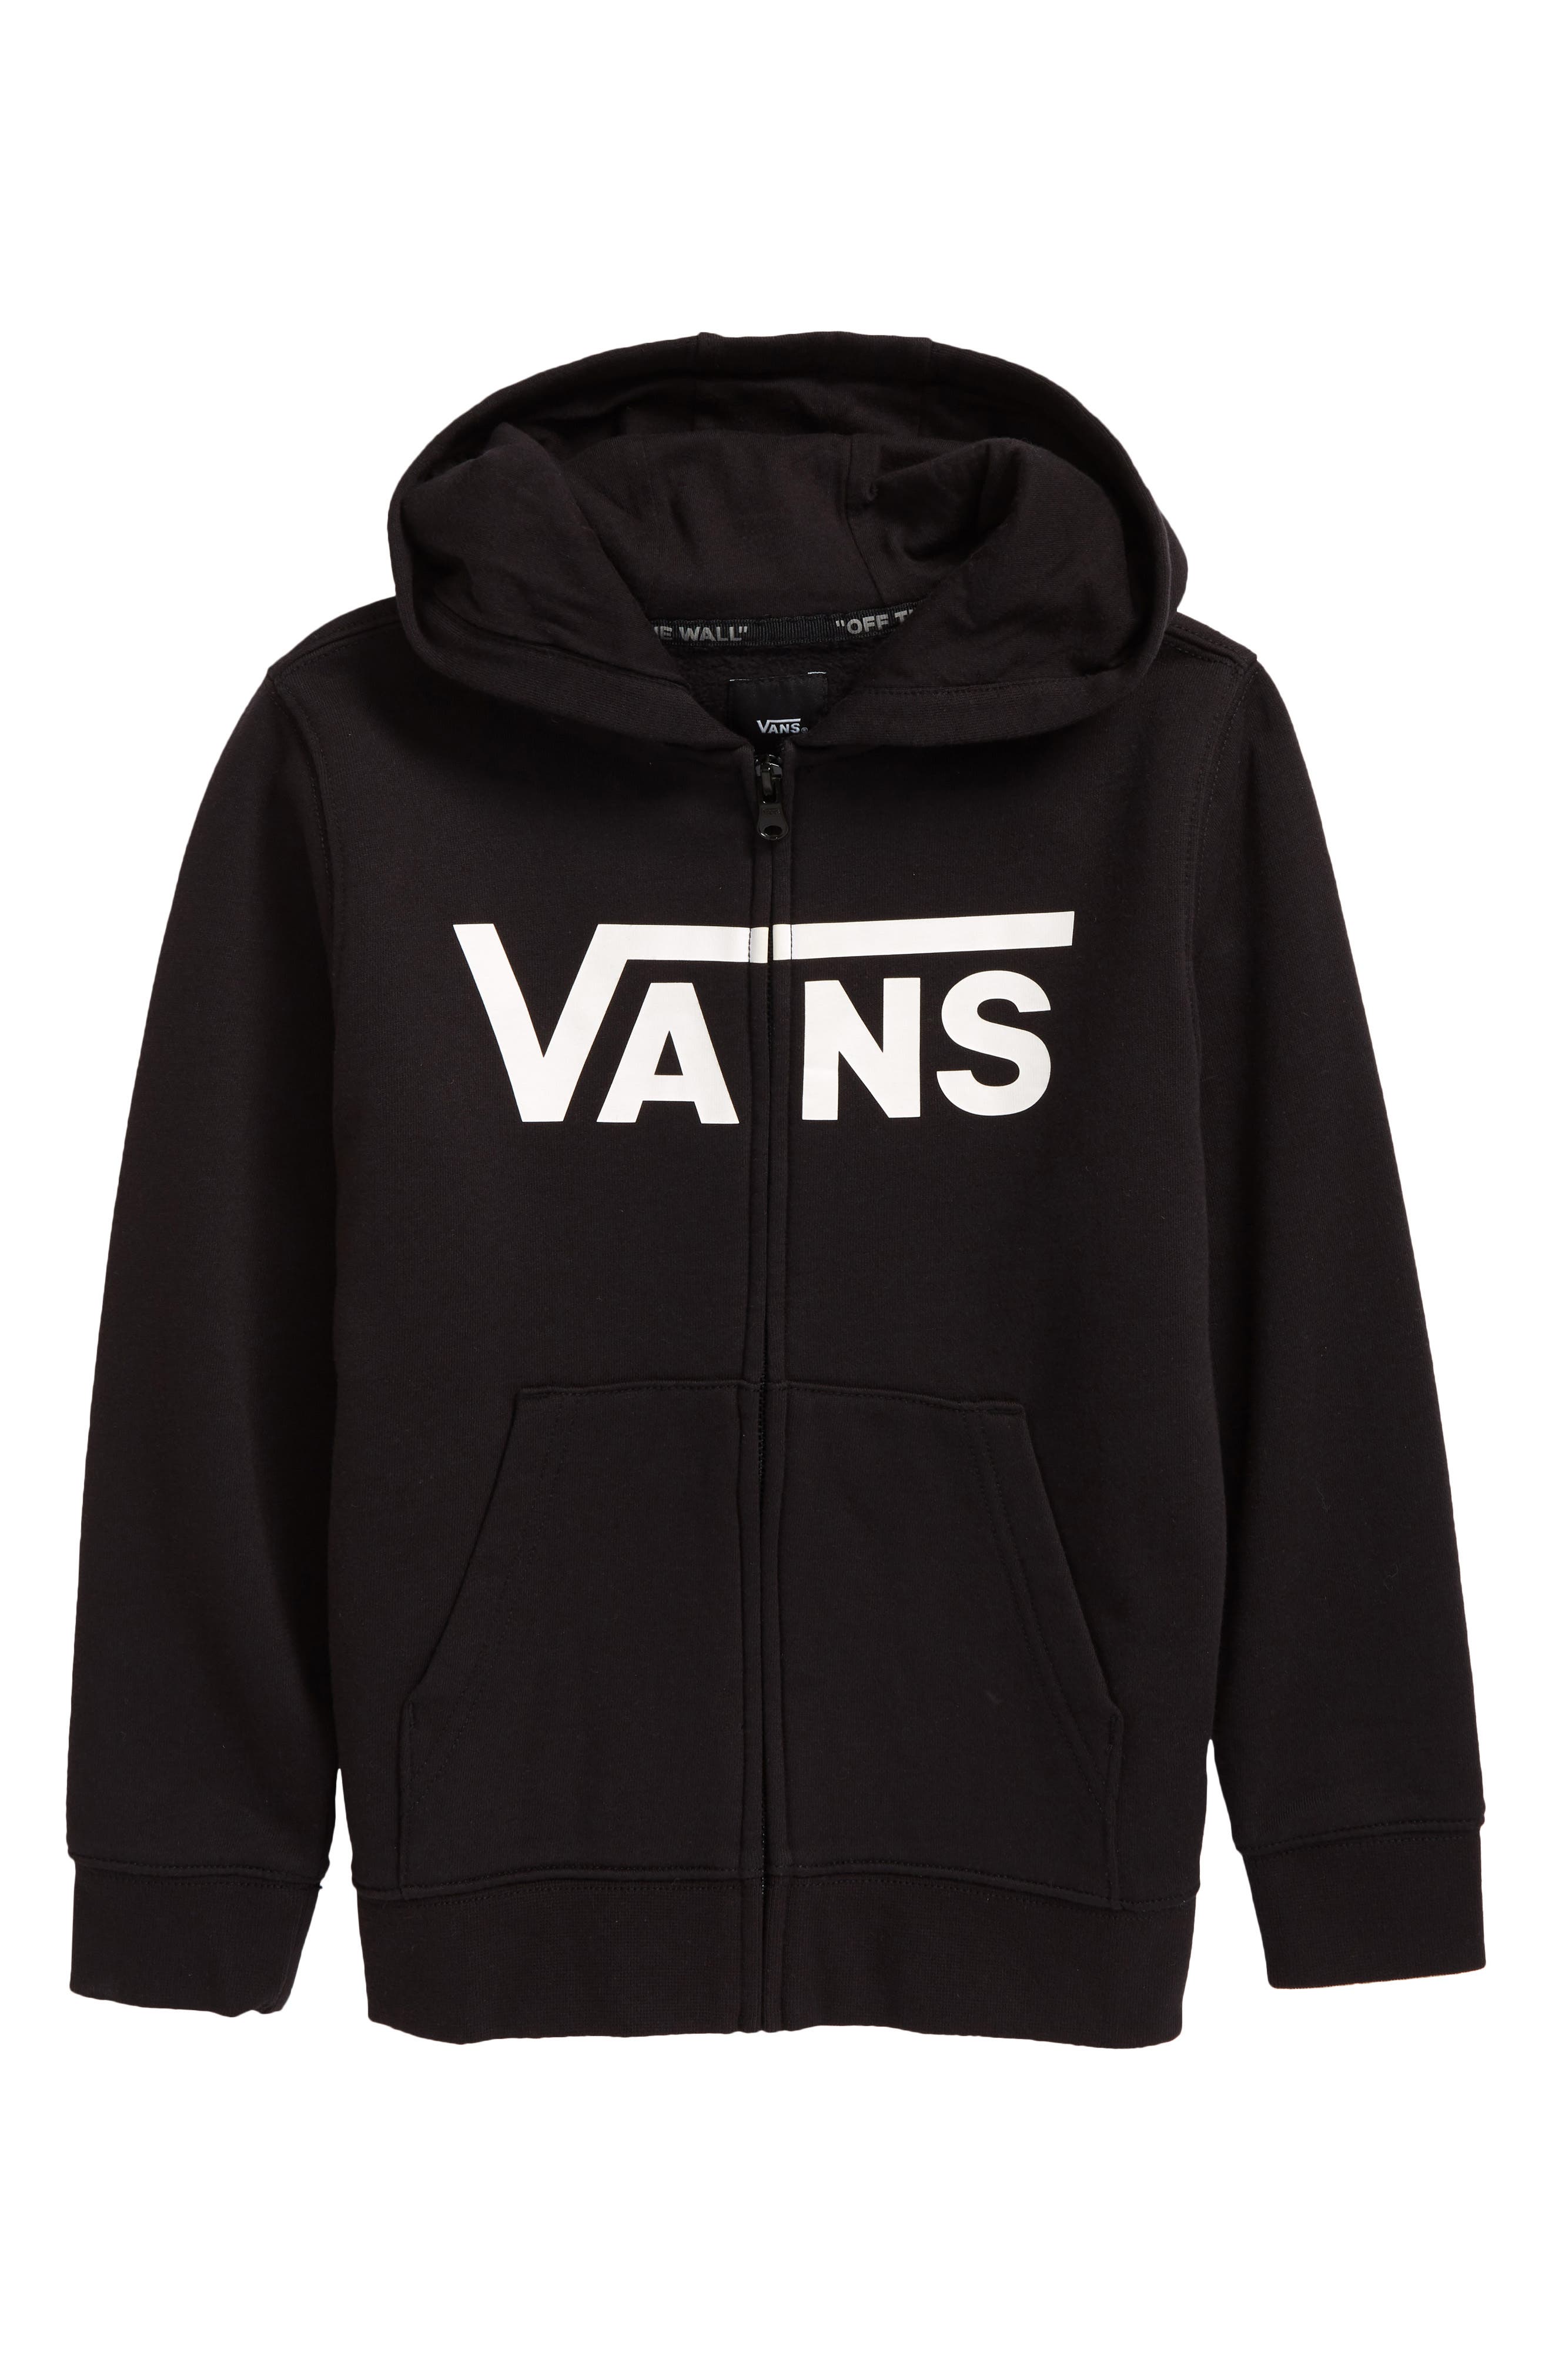 vans clothing youth